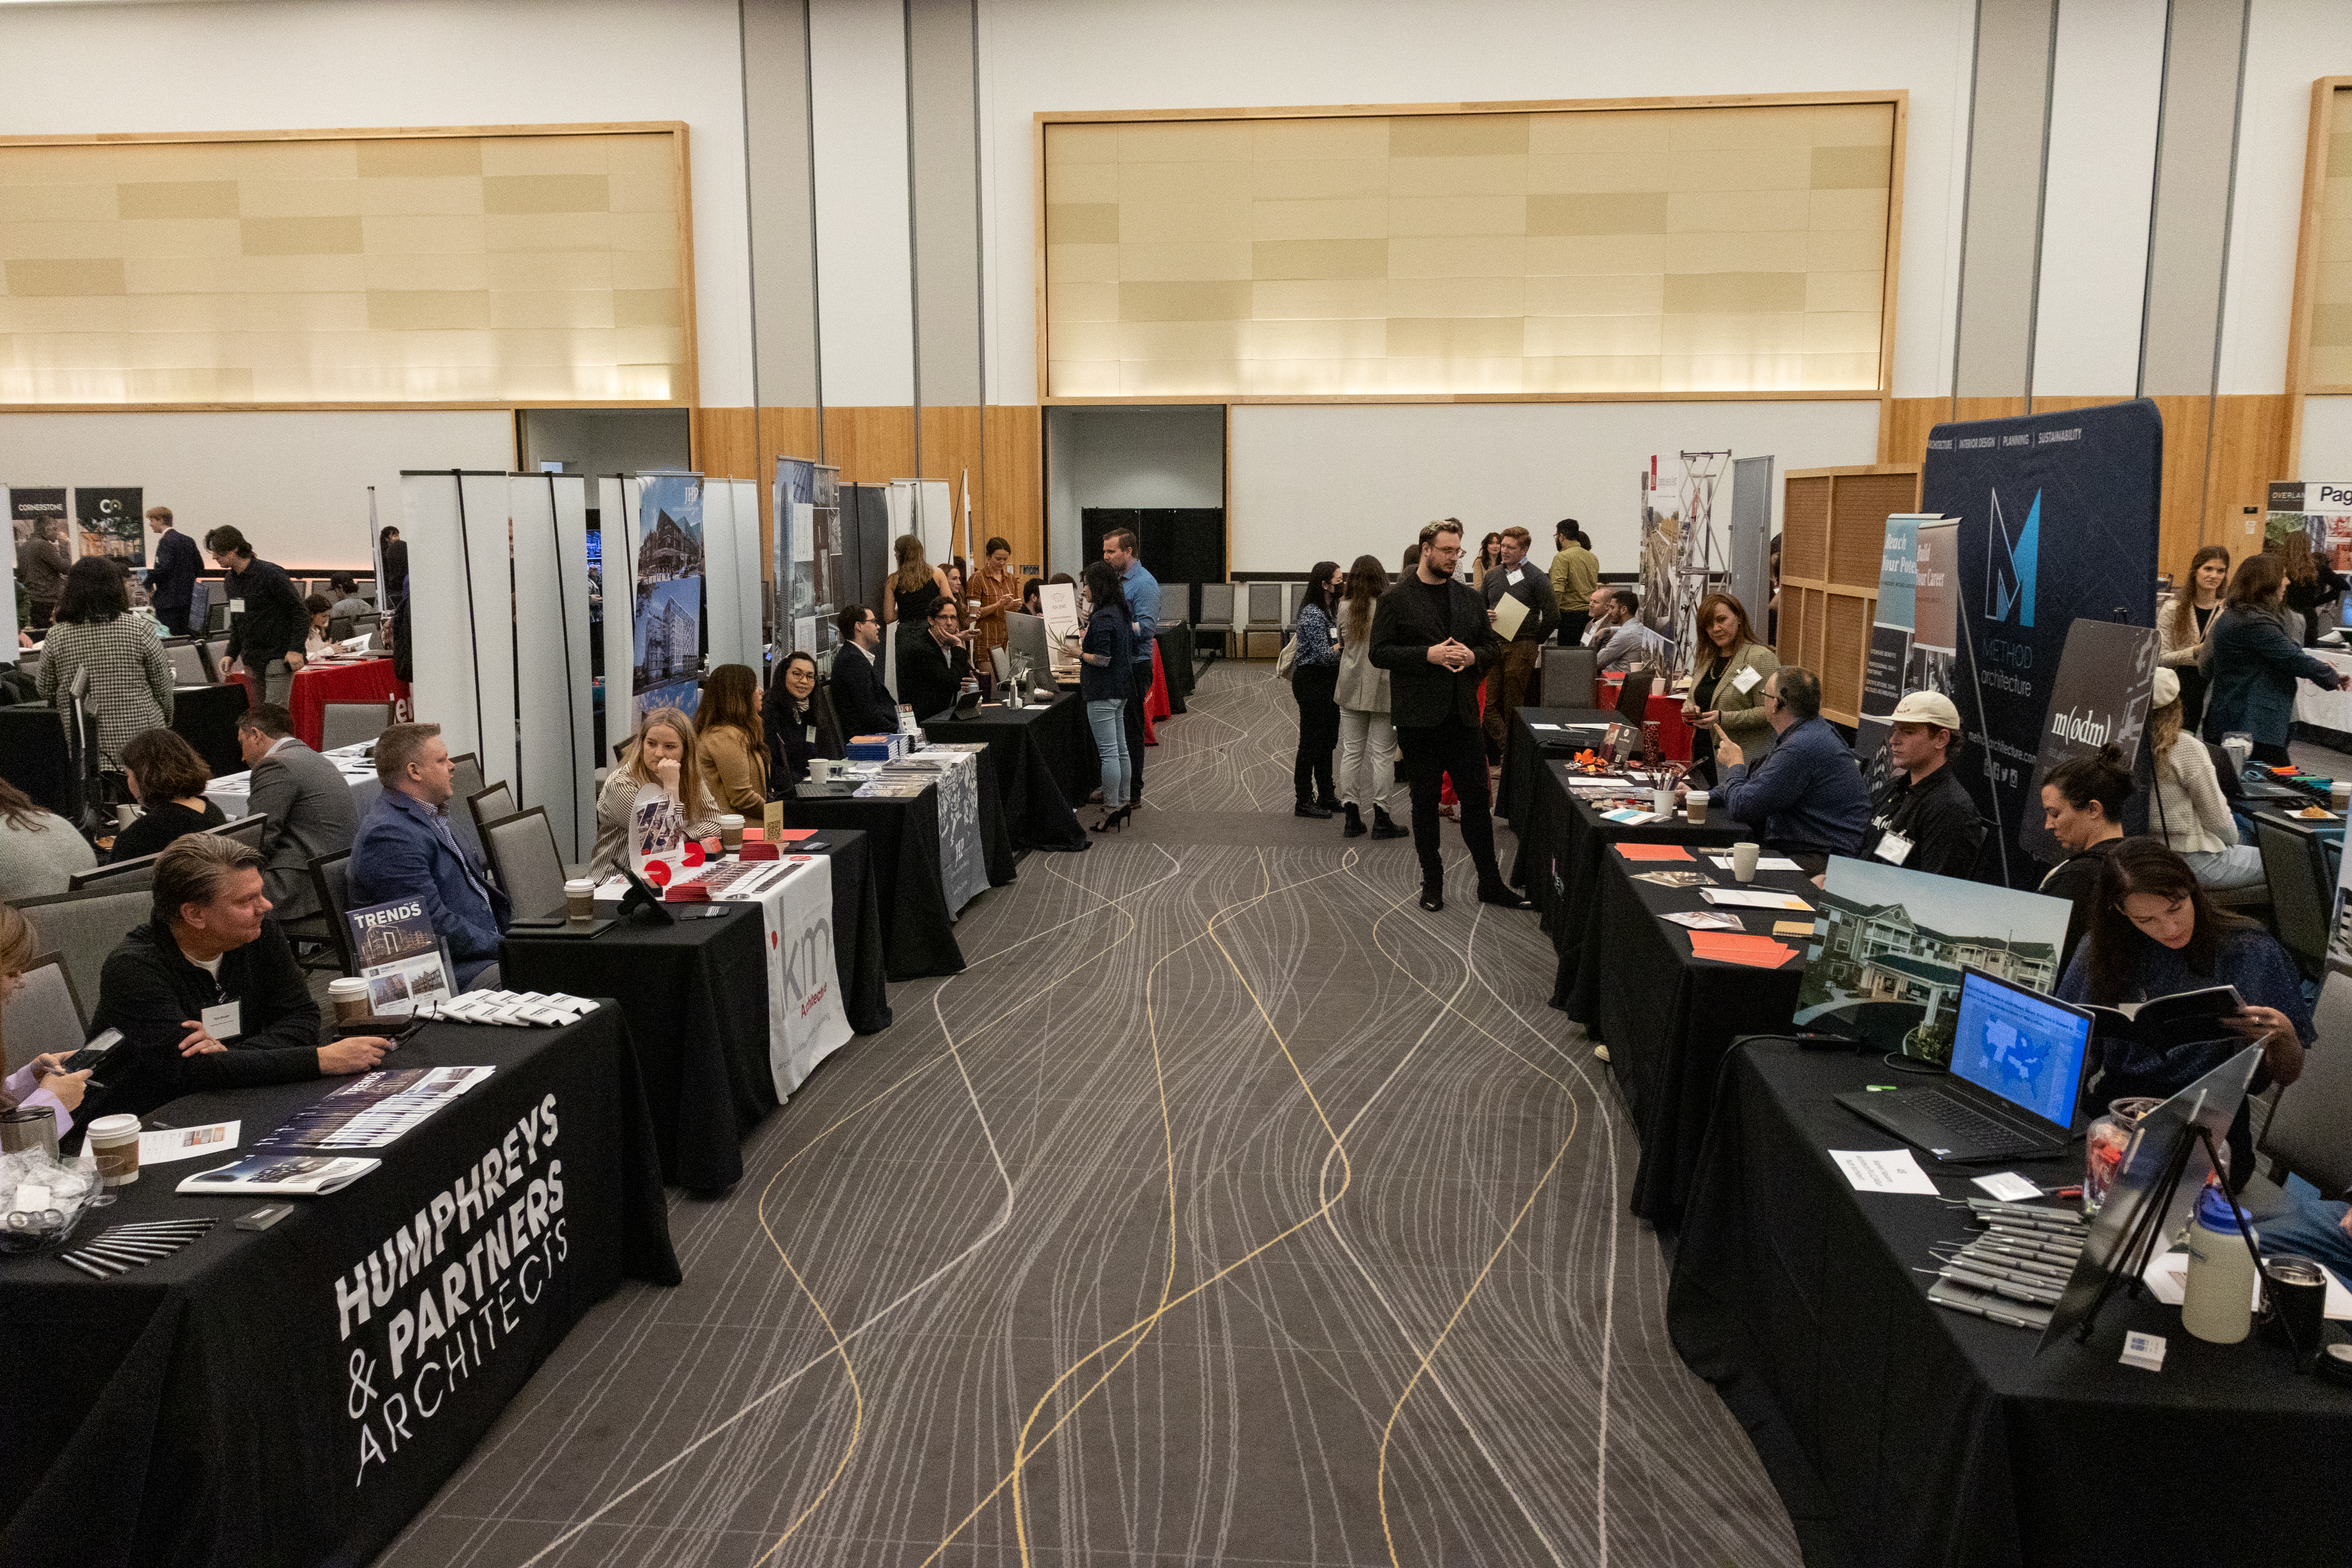 Row of employer booths set up at Career Fair